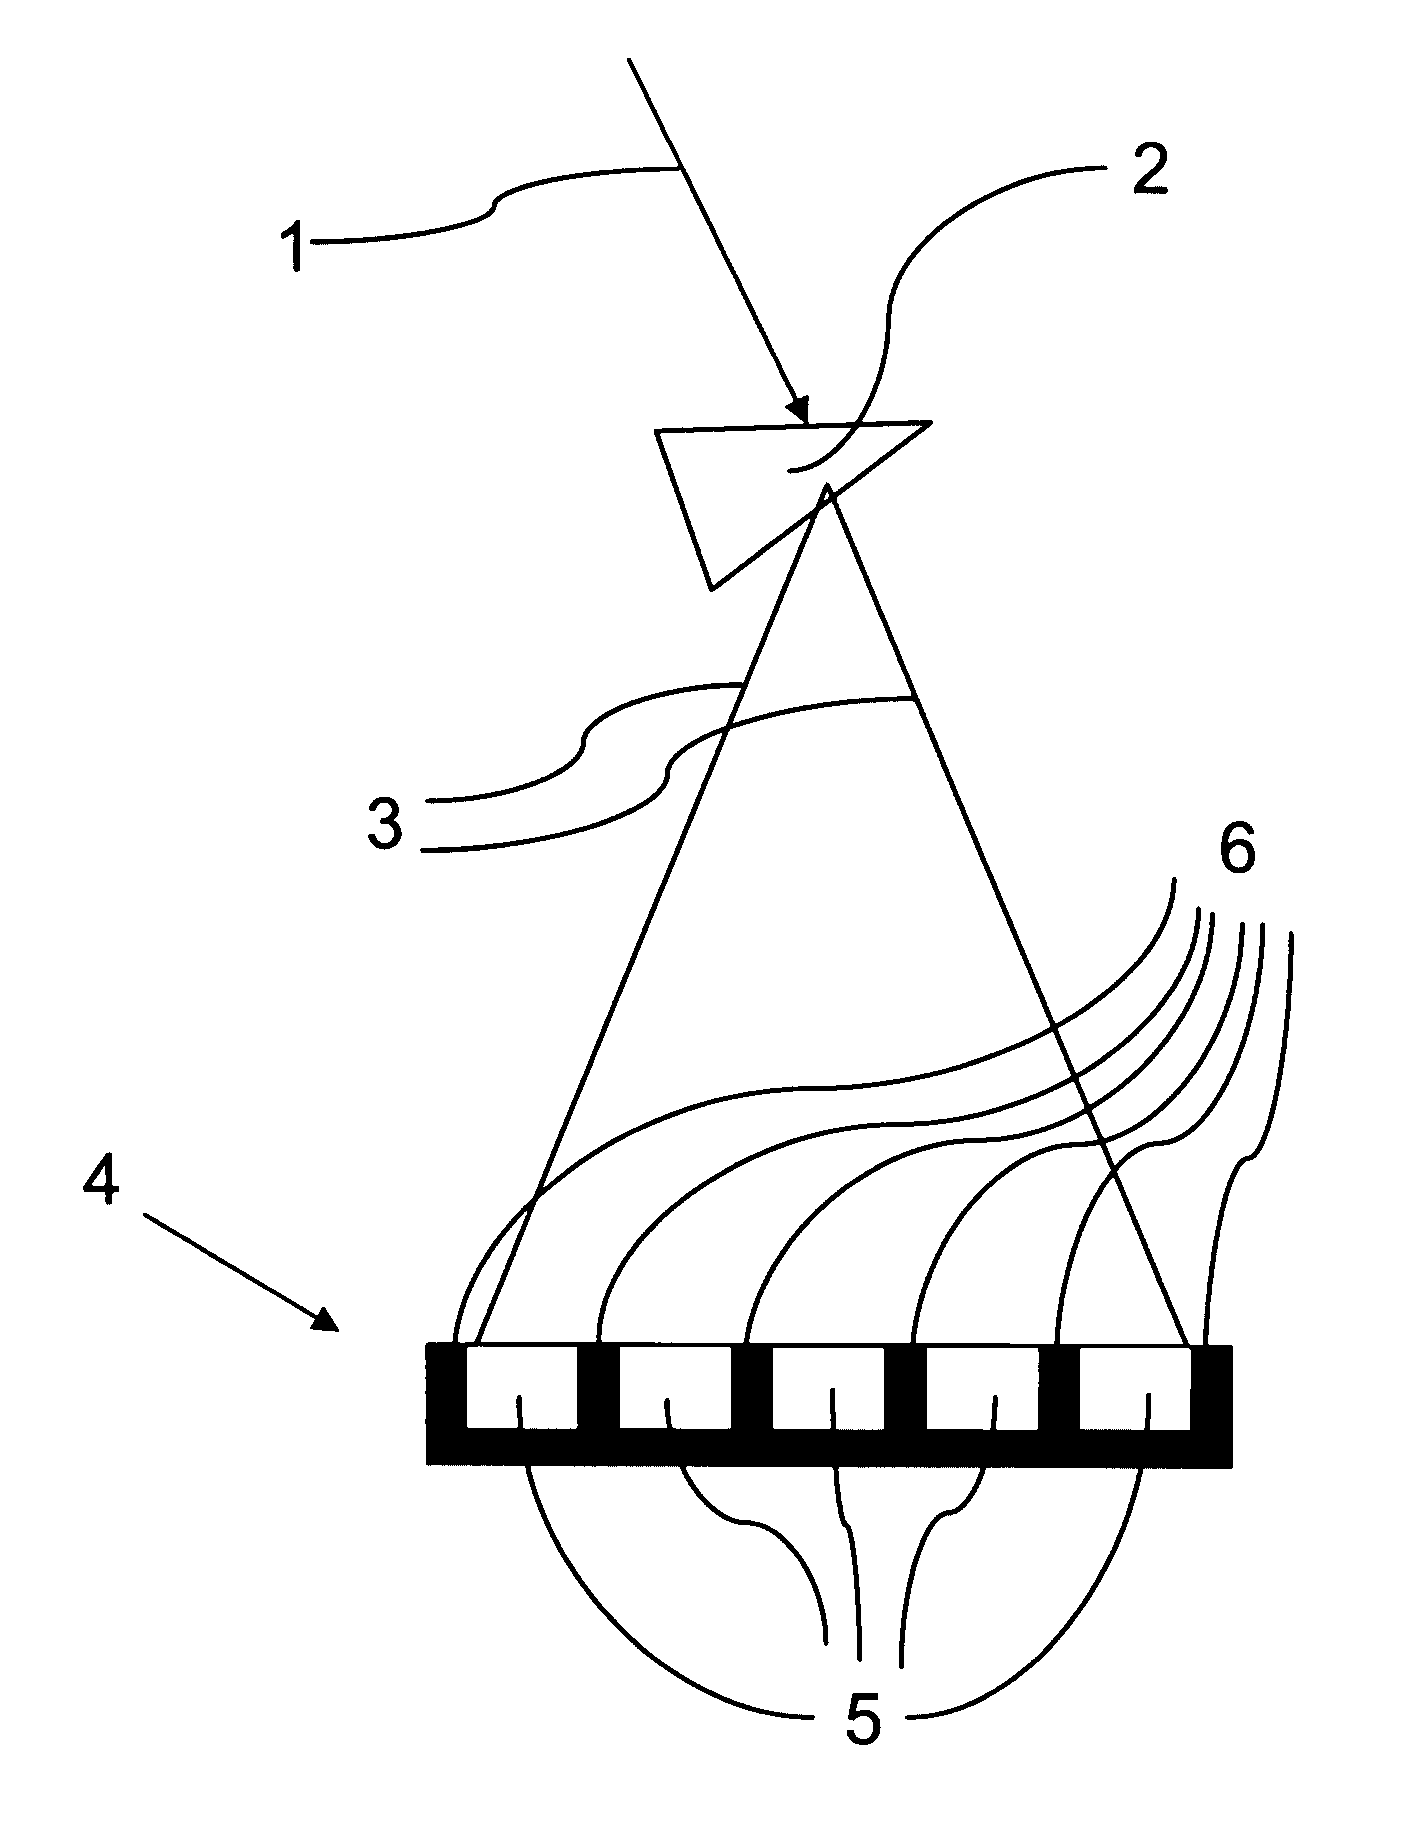 Device for selectively detecting specific wavelength components of a light beam